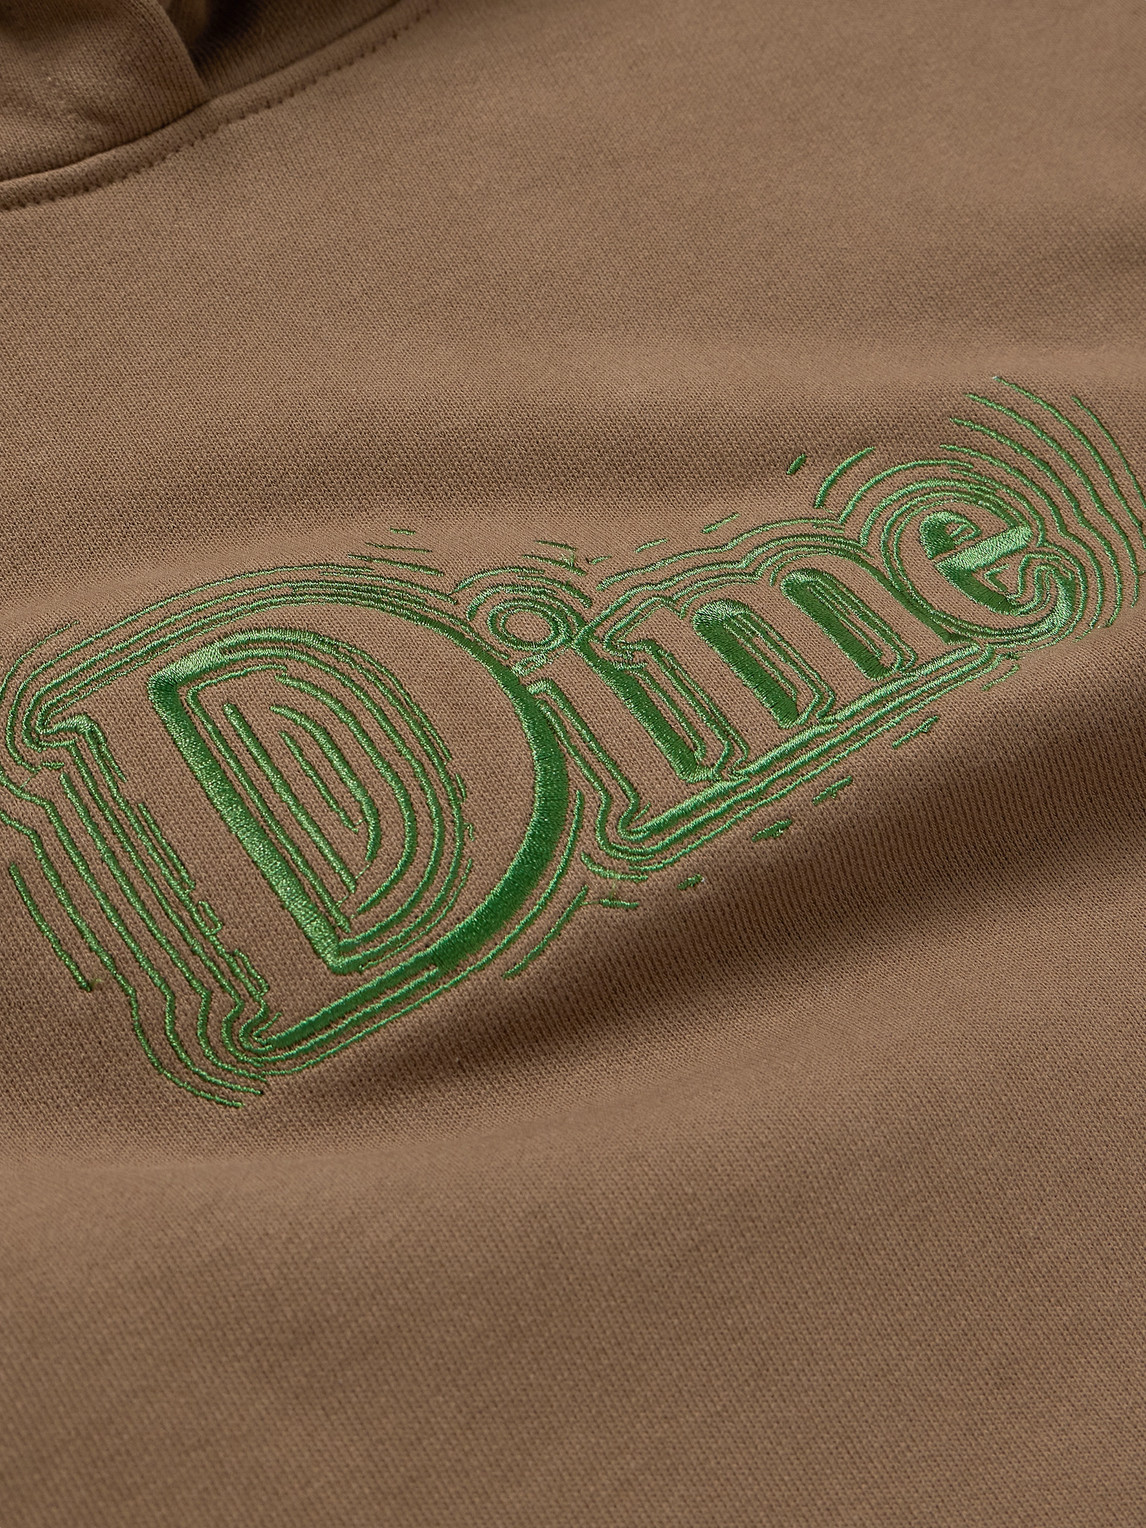 Shop Dime Classic Noize Logo-embroidered Cotton-jersey Hoodie In Brown